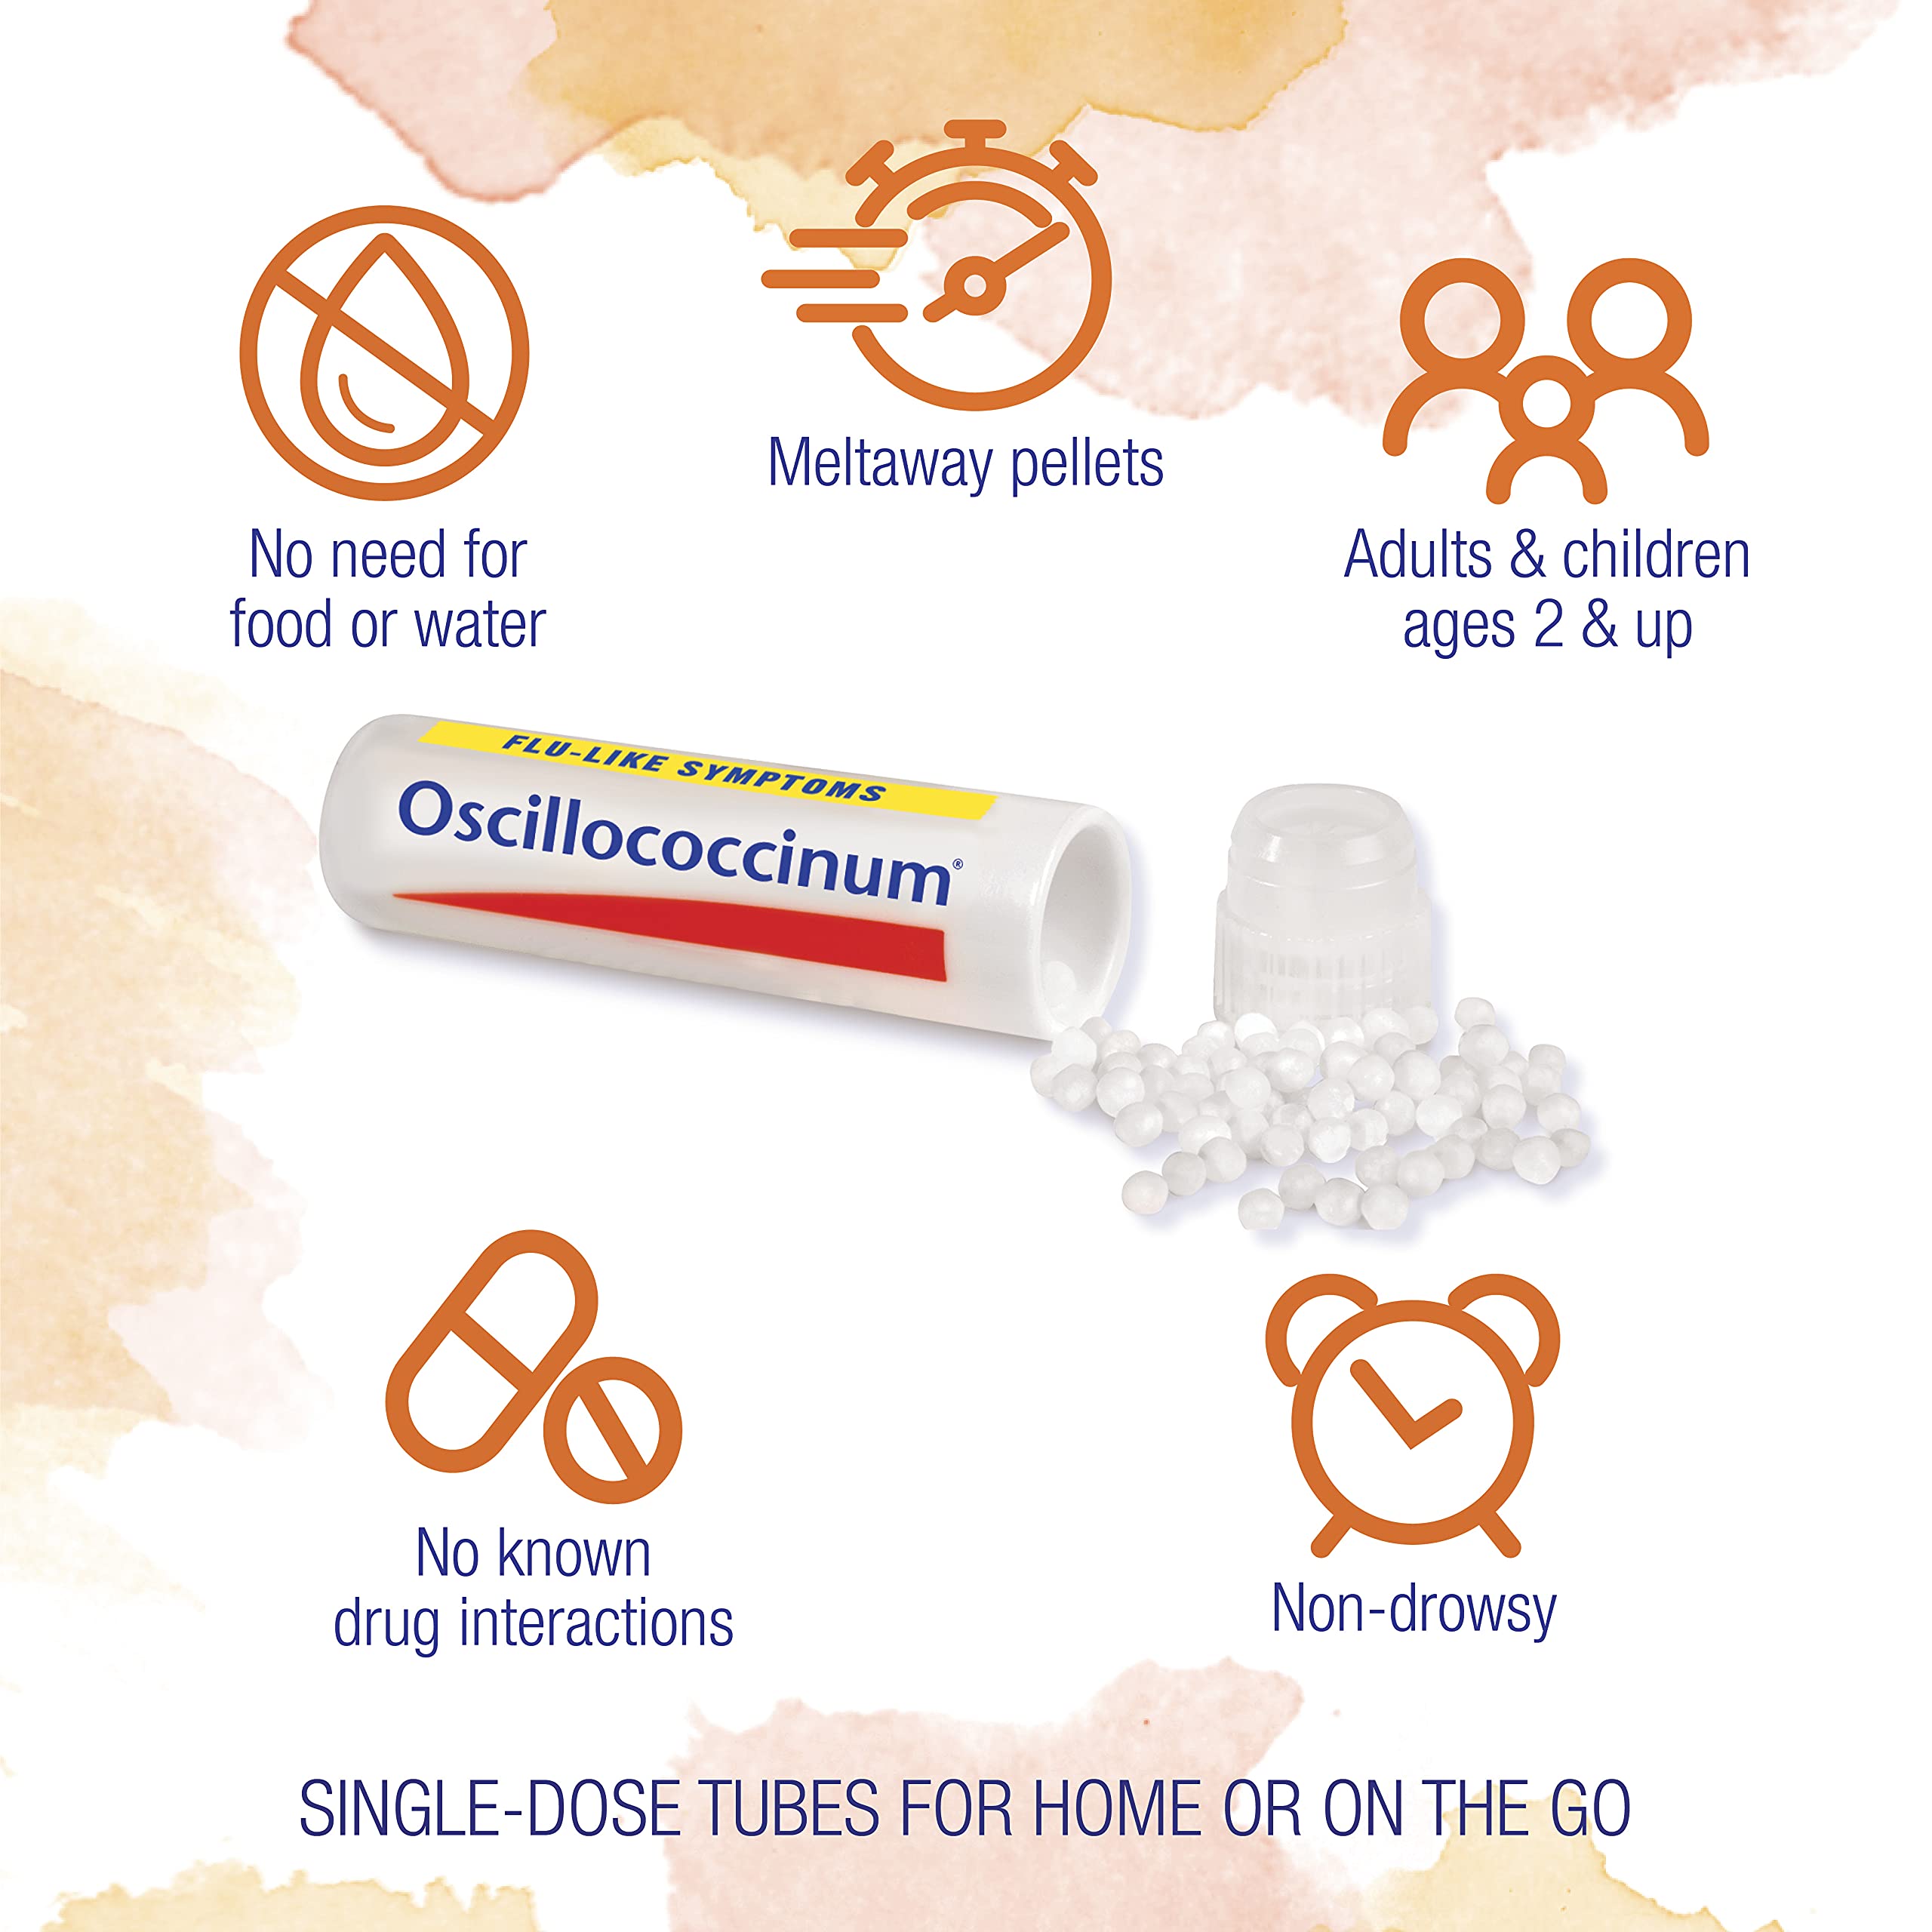 Boiron Oscillococcinum for Relief from Flu-Like Symptoms of Body Aches, Headache, Fever, Chills, and Fatigue - 6 Count